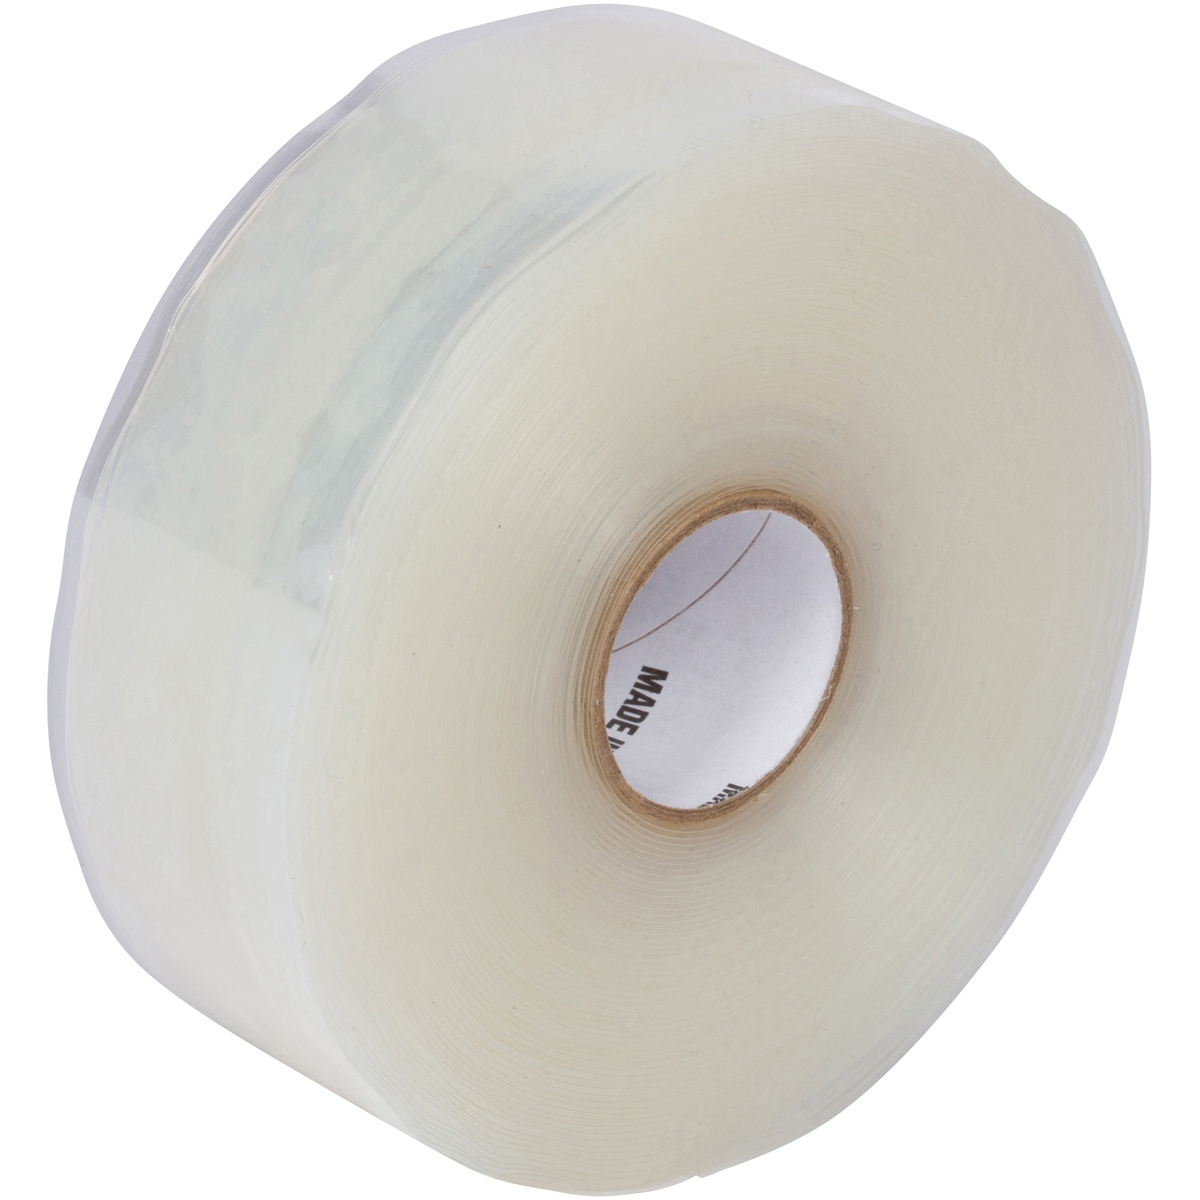 E/ Fusing 112 - Flame Resistant High Temperature Silicone Electrical Insulation  Tape 1 in x 30 ft - Tommy Tape Self-Fusing Silicone